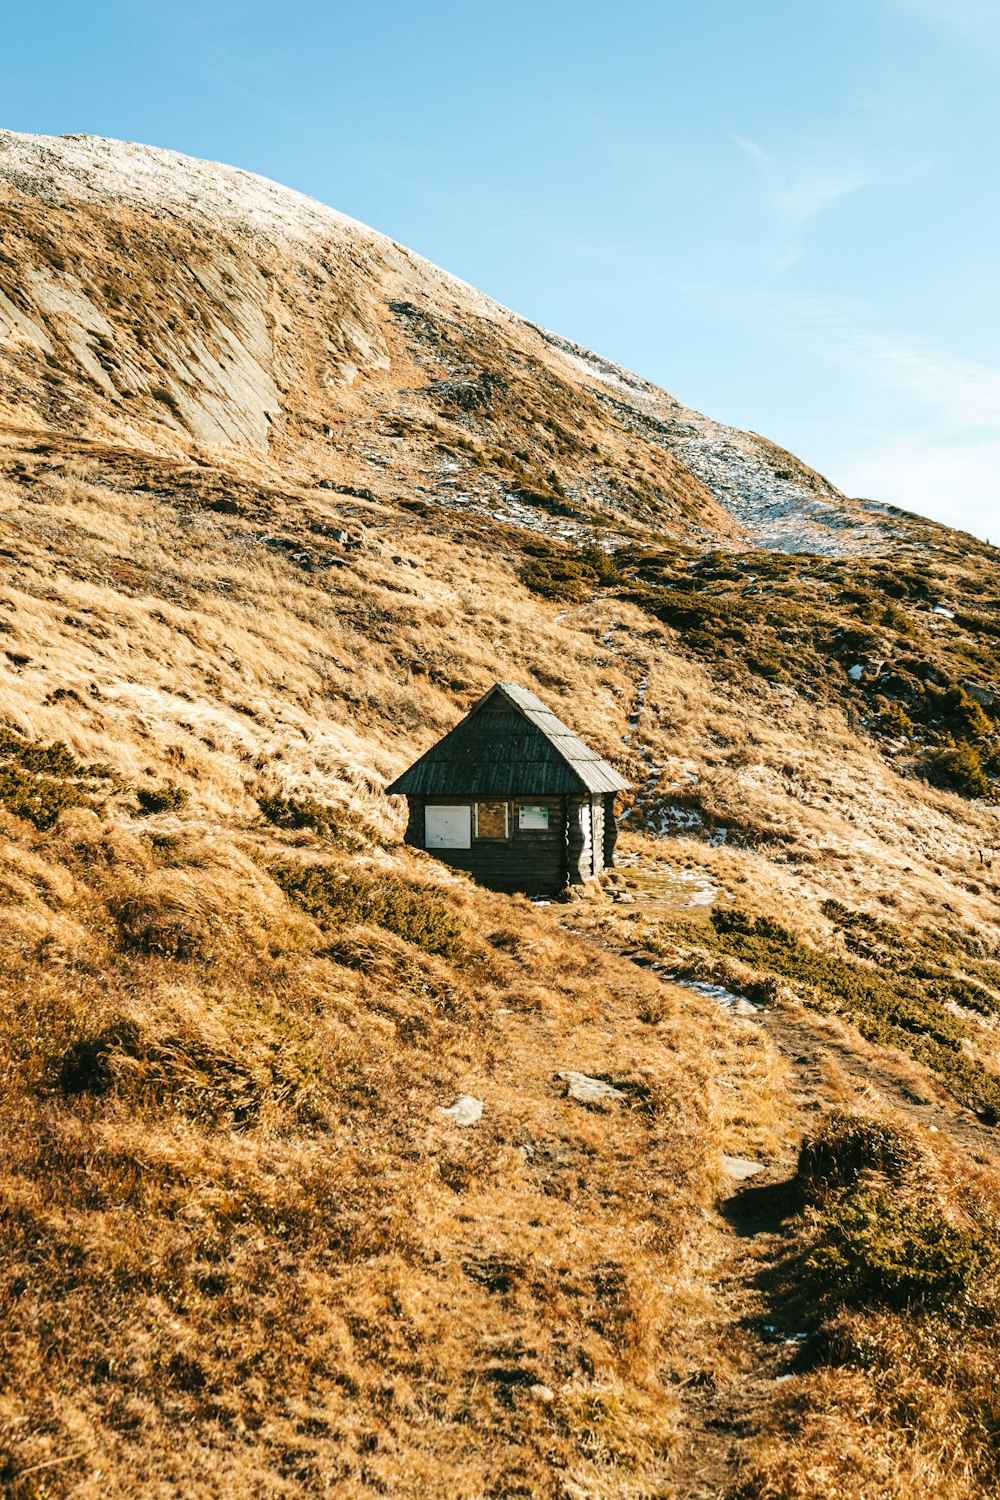 a small hut sitting on the side of a hill